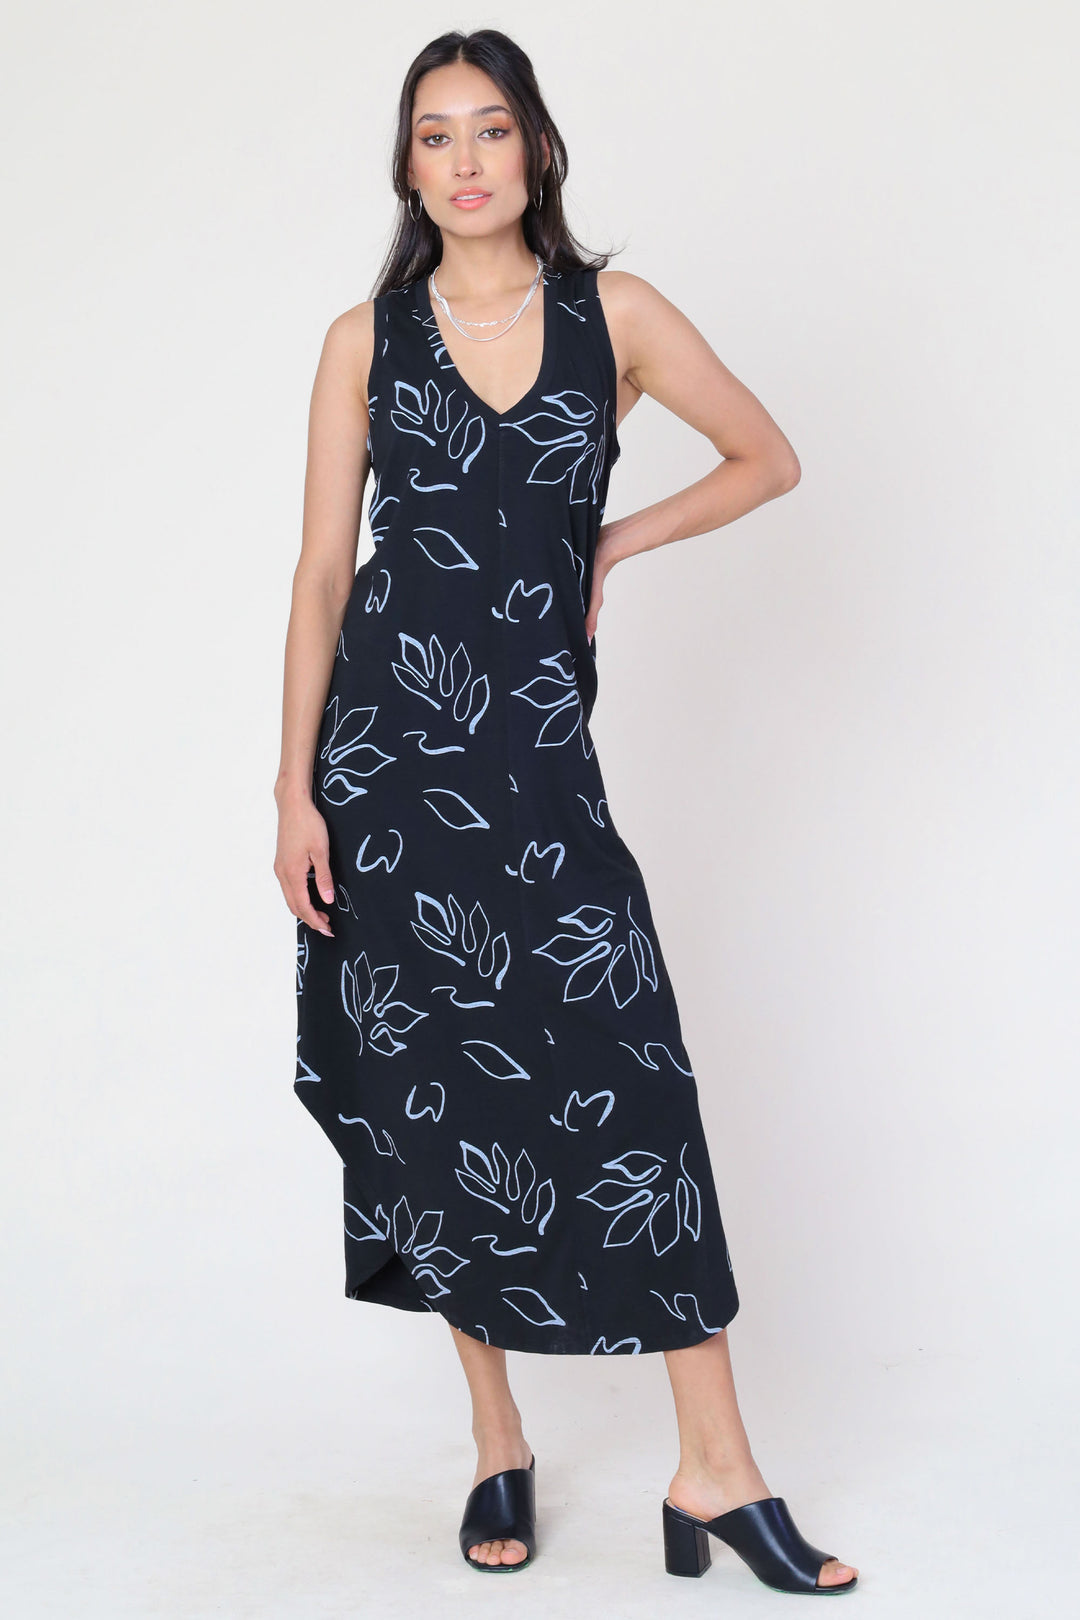 Funsport Summer 2024 Introducing our Black Palms Sleeveless Dress, the perfect combination of sleek and versatile. This long dress features a flattering a-line style, making it suitable for both day and night. 